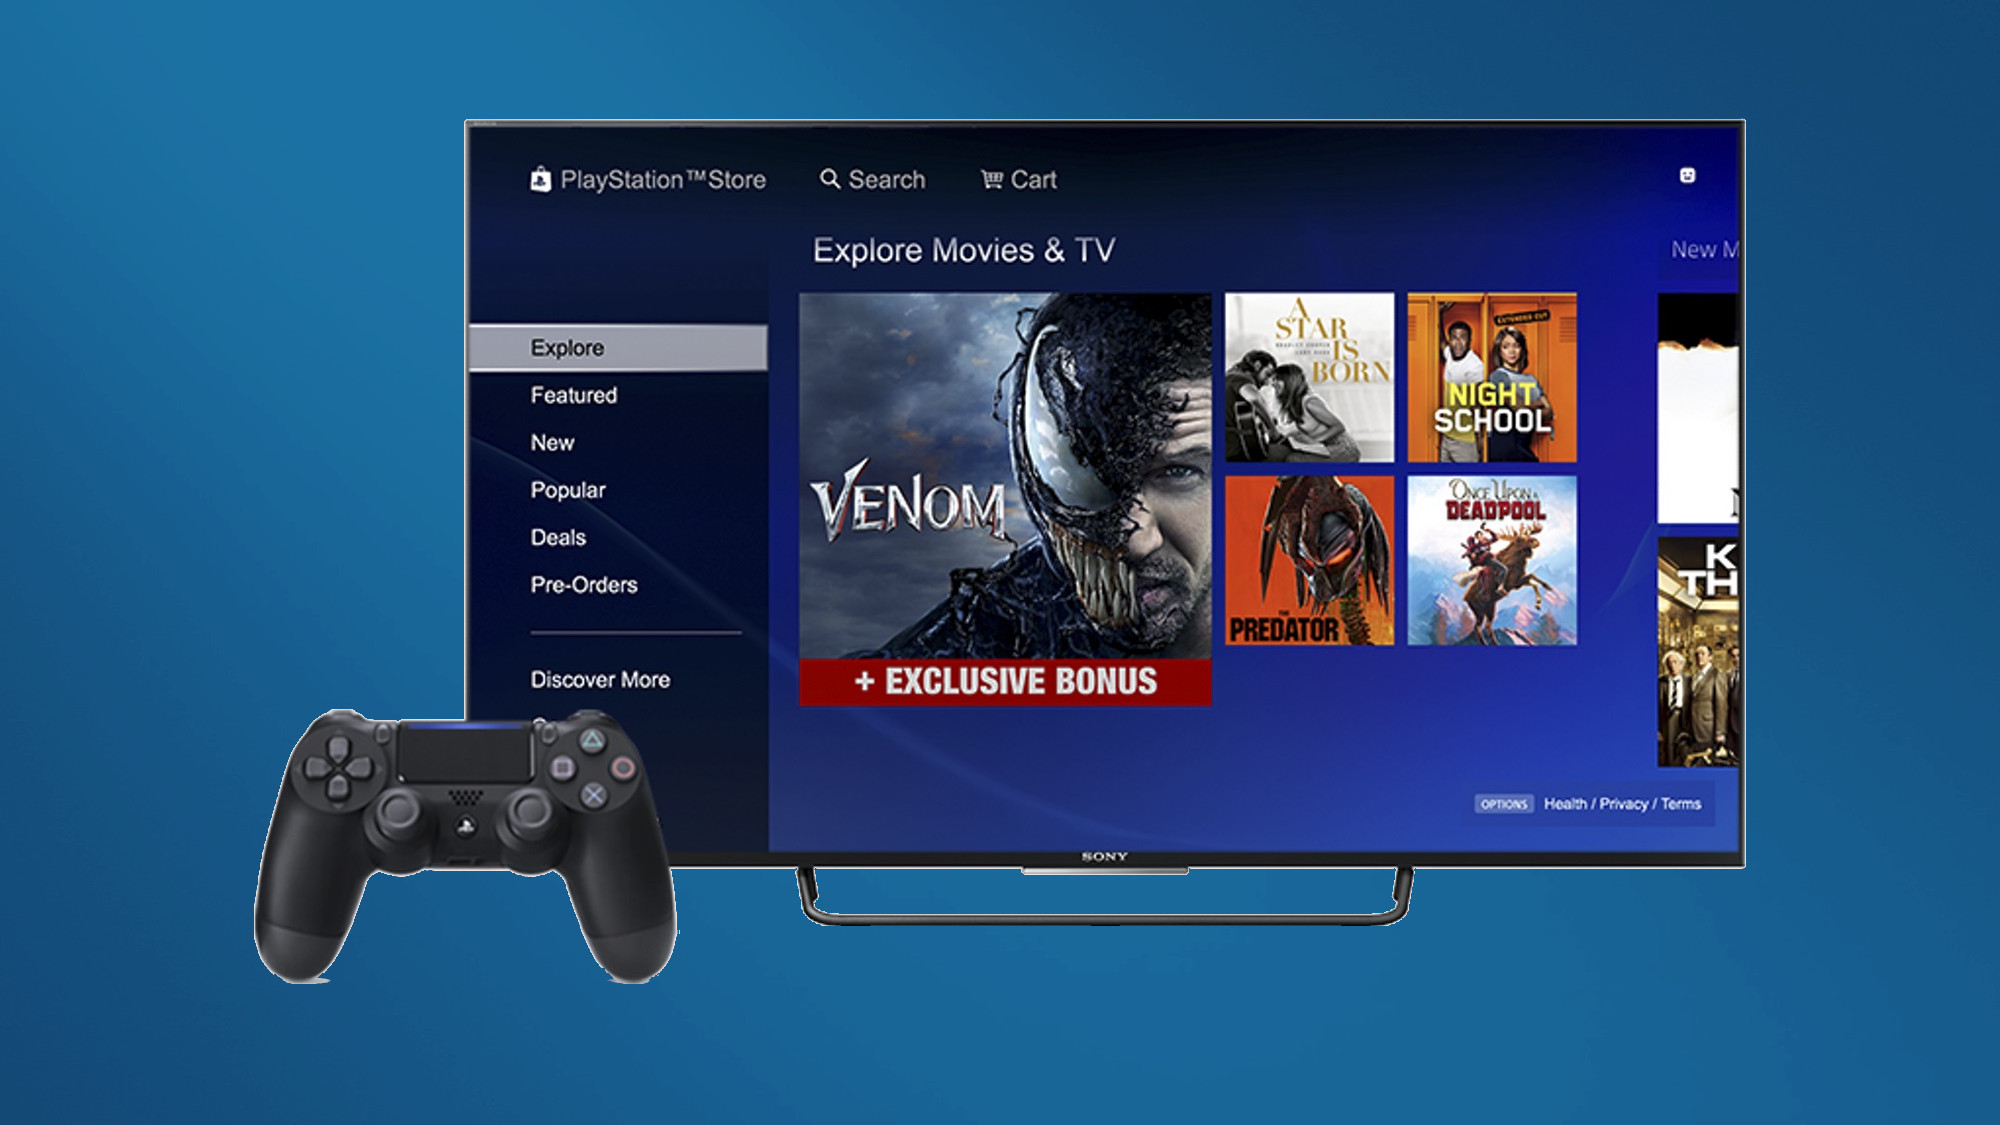 PlayStation Video shutting down soon on PS5 and PS4 — what need to know | Tom's Guide